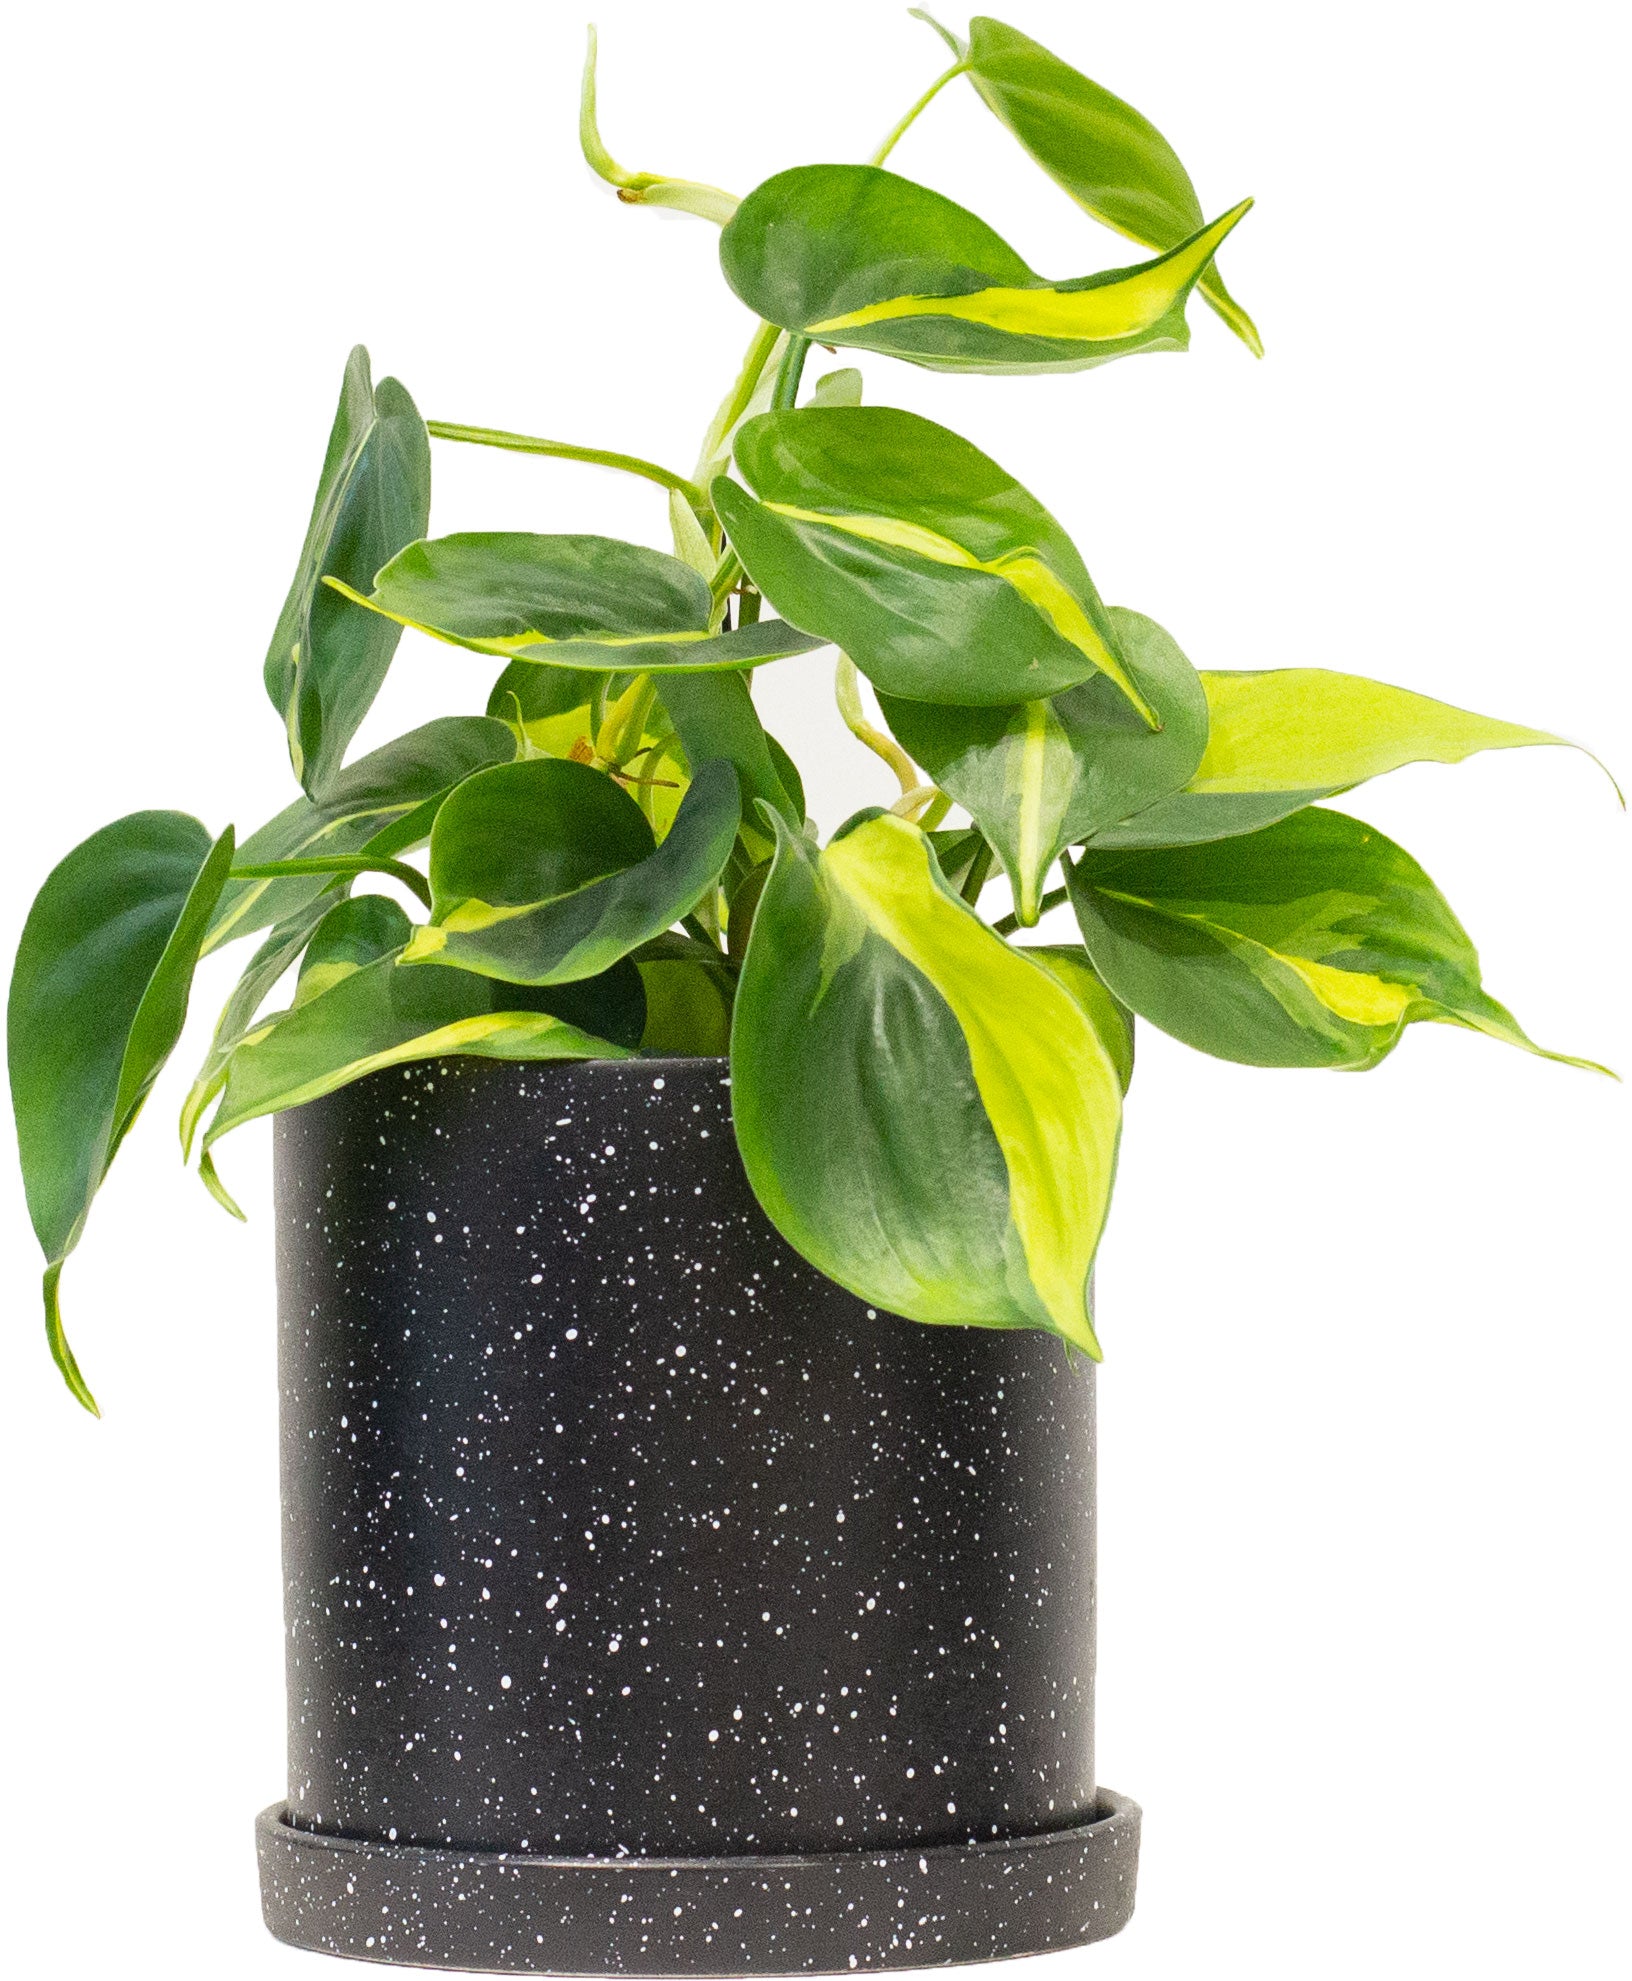 Set of Potted Easy-Care Lush Houseplants - Bundle of Lush Easy-Care Plants Philodendron Scandens Brasil & Chinese Evergreen & Maranta Tricolor 6” - Buy set of repotted easy-care indoor plants for delivery at Planteia